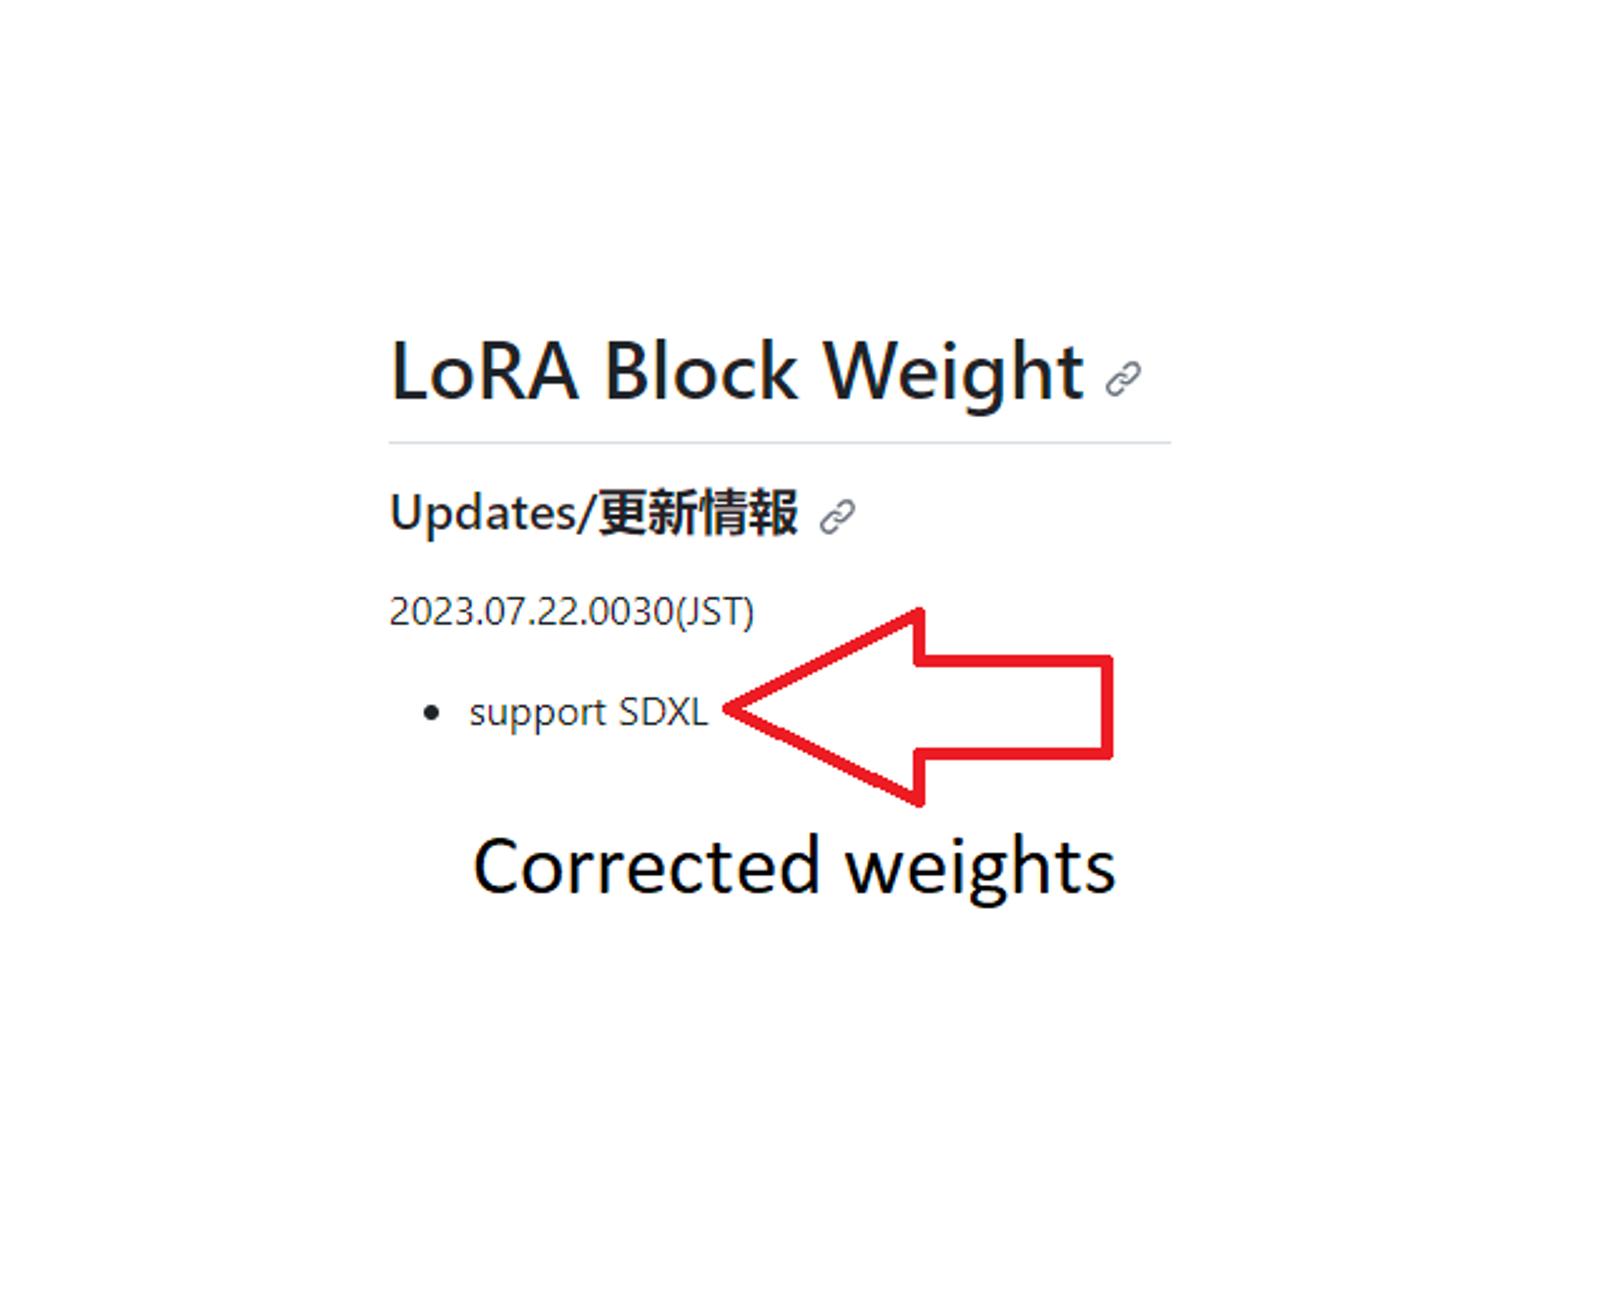 LoRA Block Weight extension in AUTOMATIC1111: weights, usage, XYZ plots for SDXL LoRA